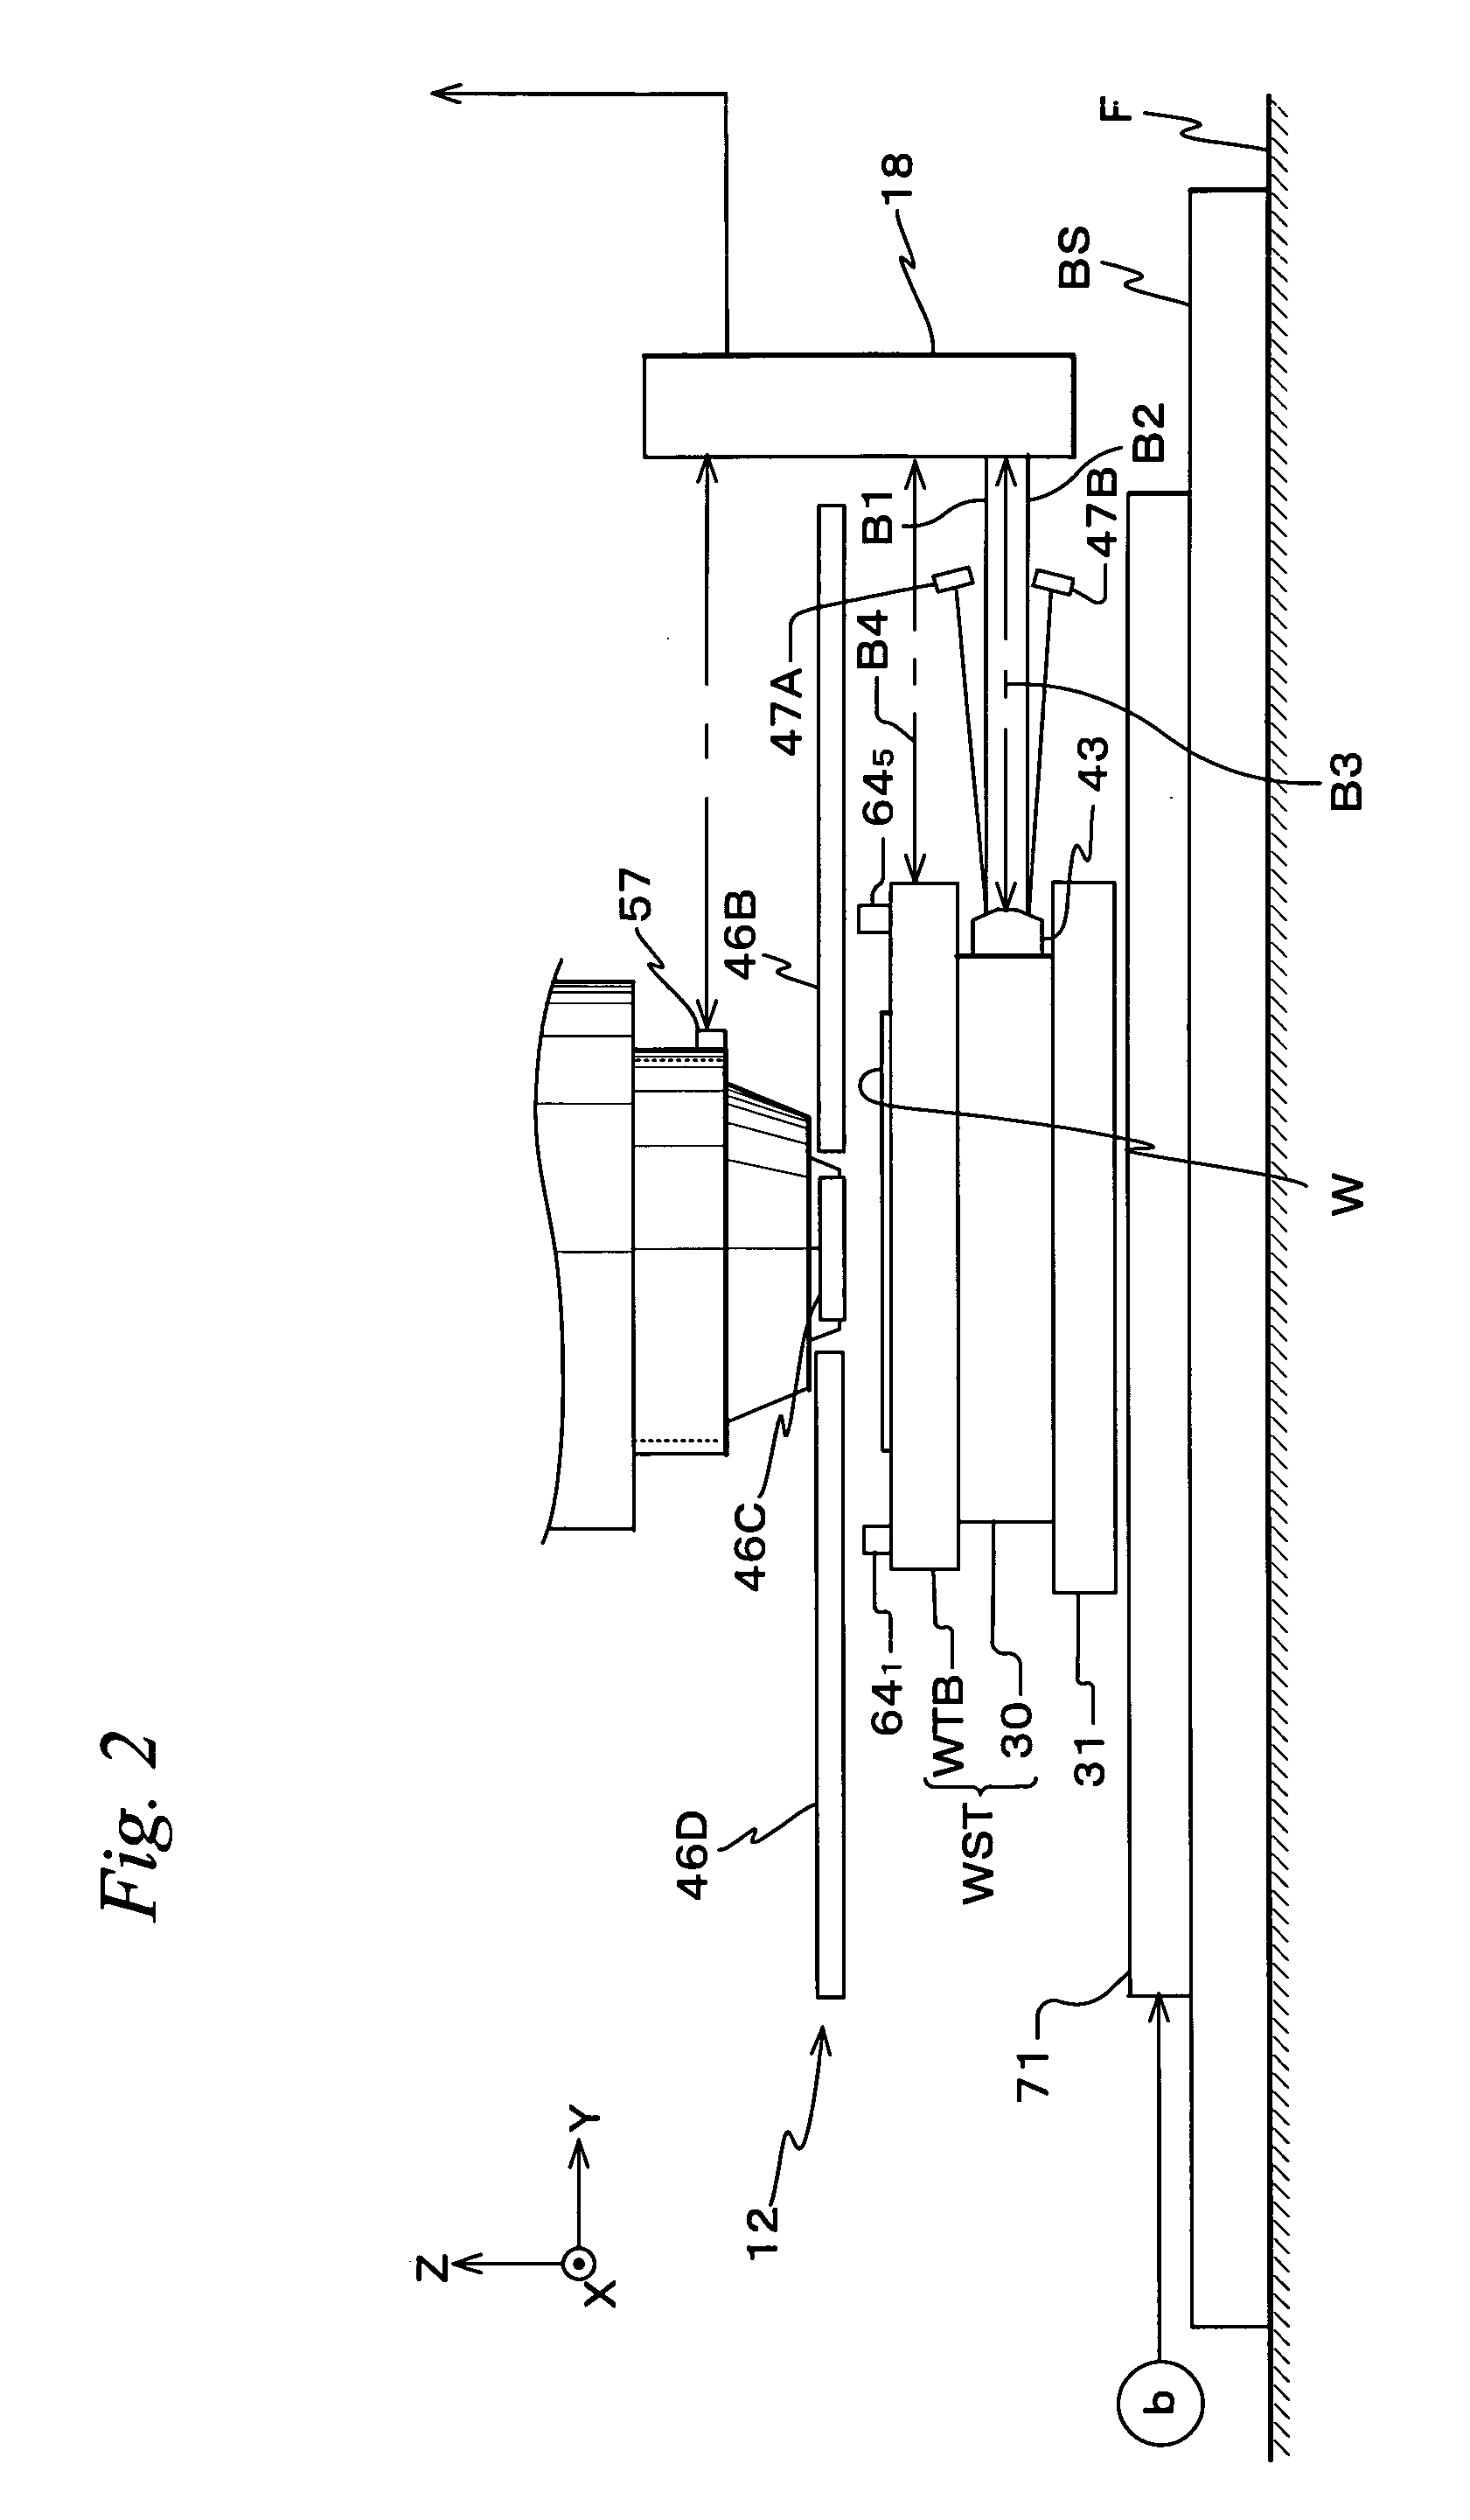 Movable body drive system, pattern formation apparatus, exposure apparatus and exposure method, and device manufacturing method